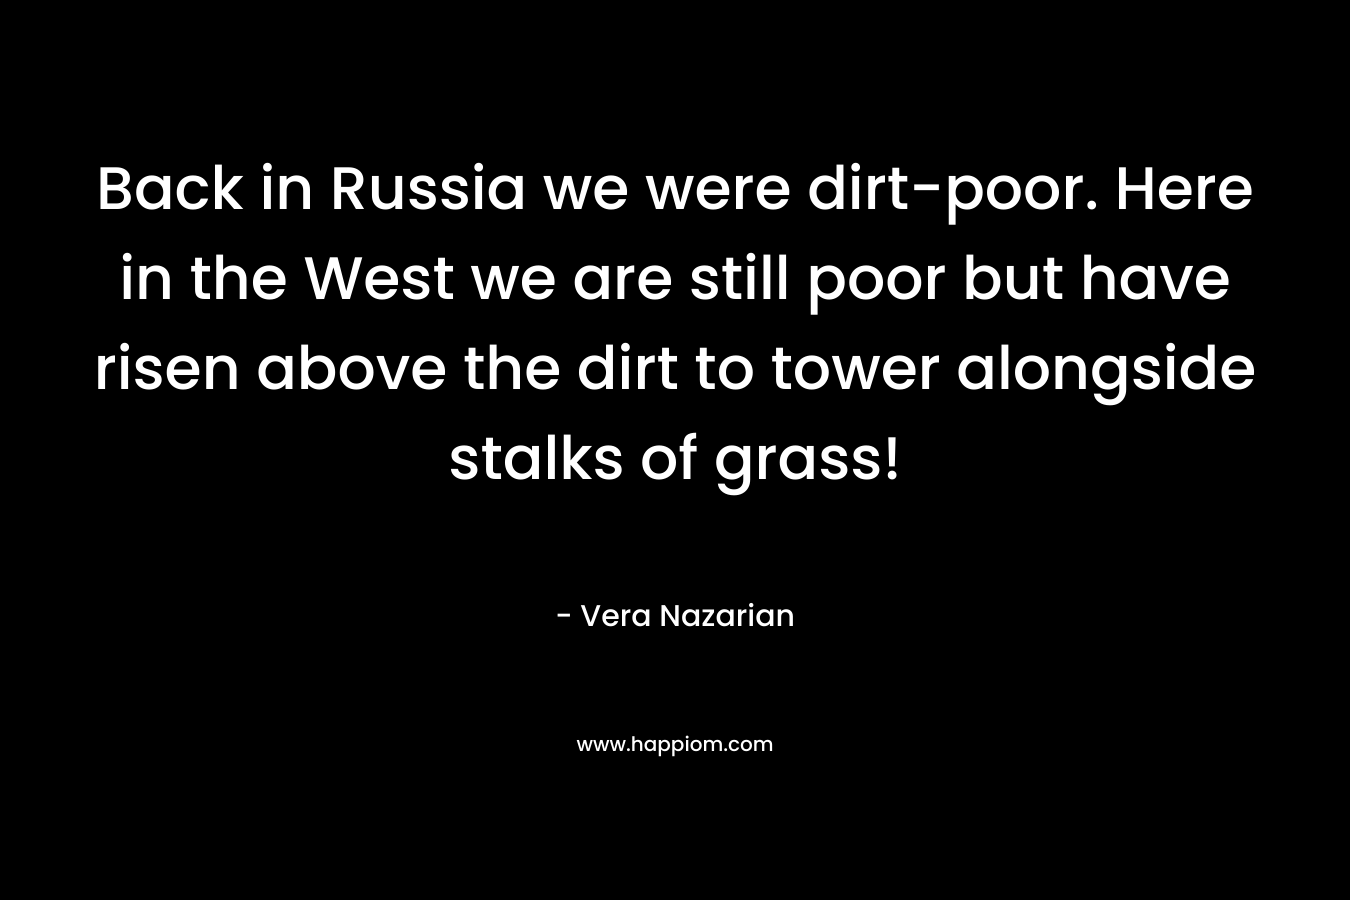 Back in Russia we were dirt-poor. Here in the West we are still poor but have risen above the dirt to tower alongside stalks of grass!